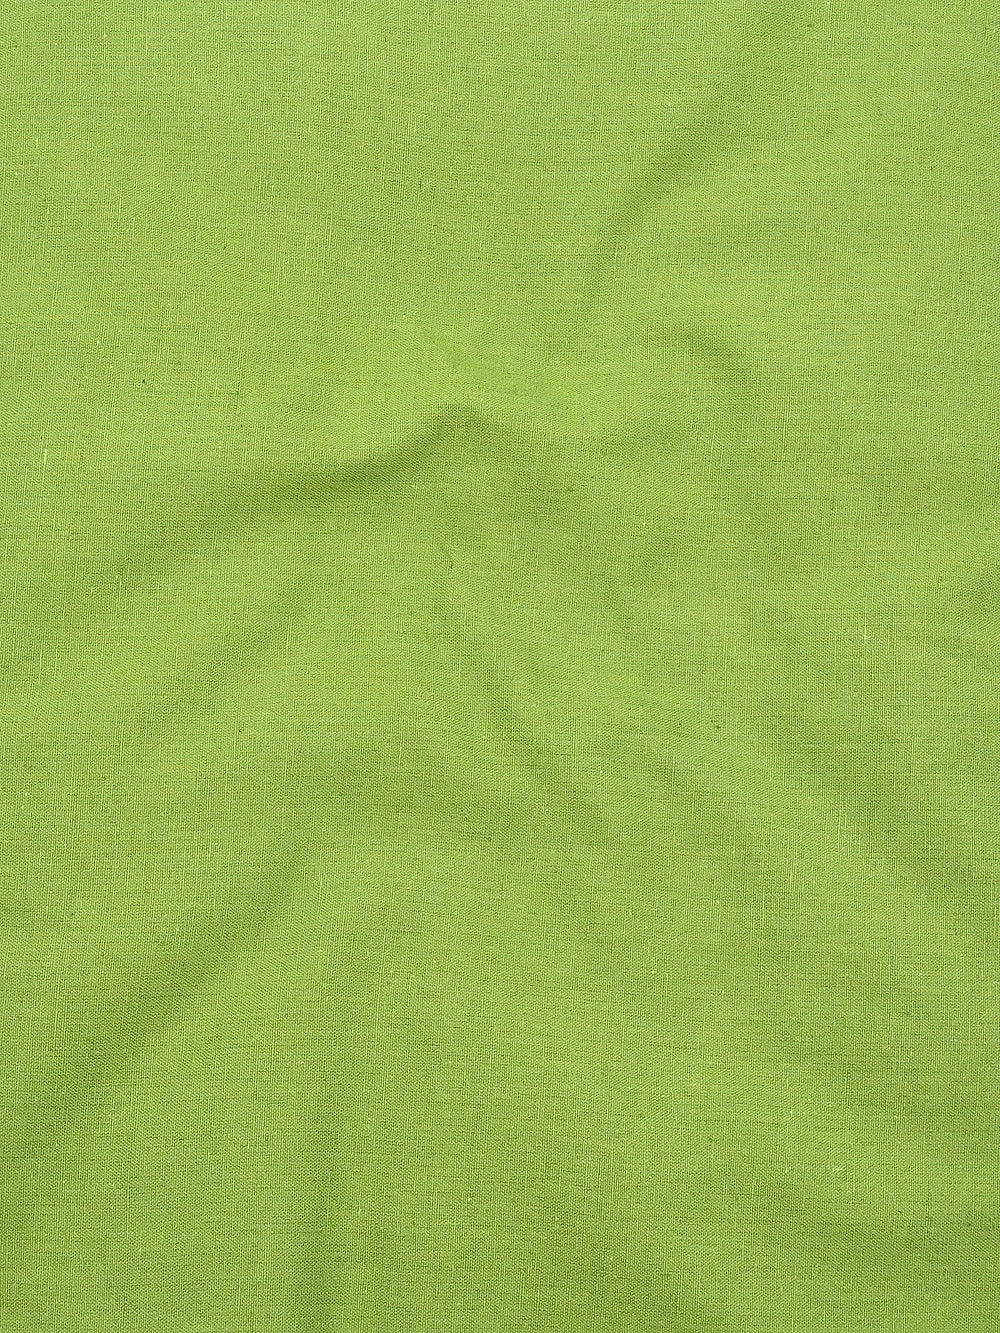 CF-20 Shade Solid Dyed Woven Cotton Flex Fabric